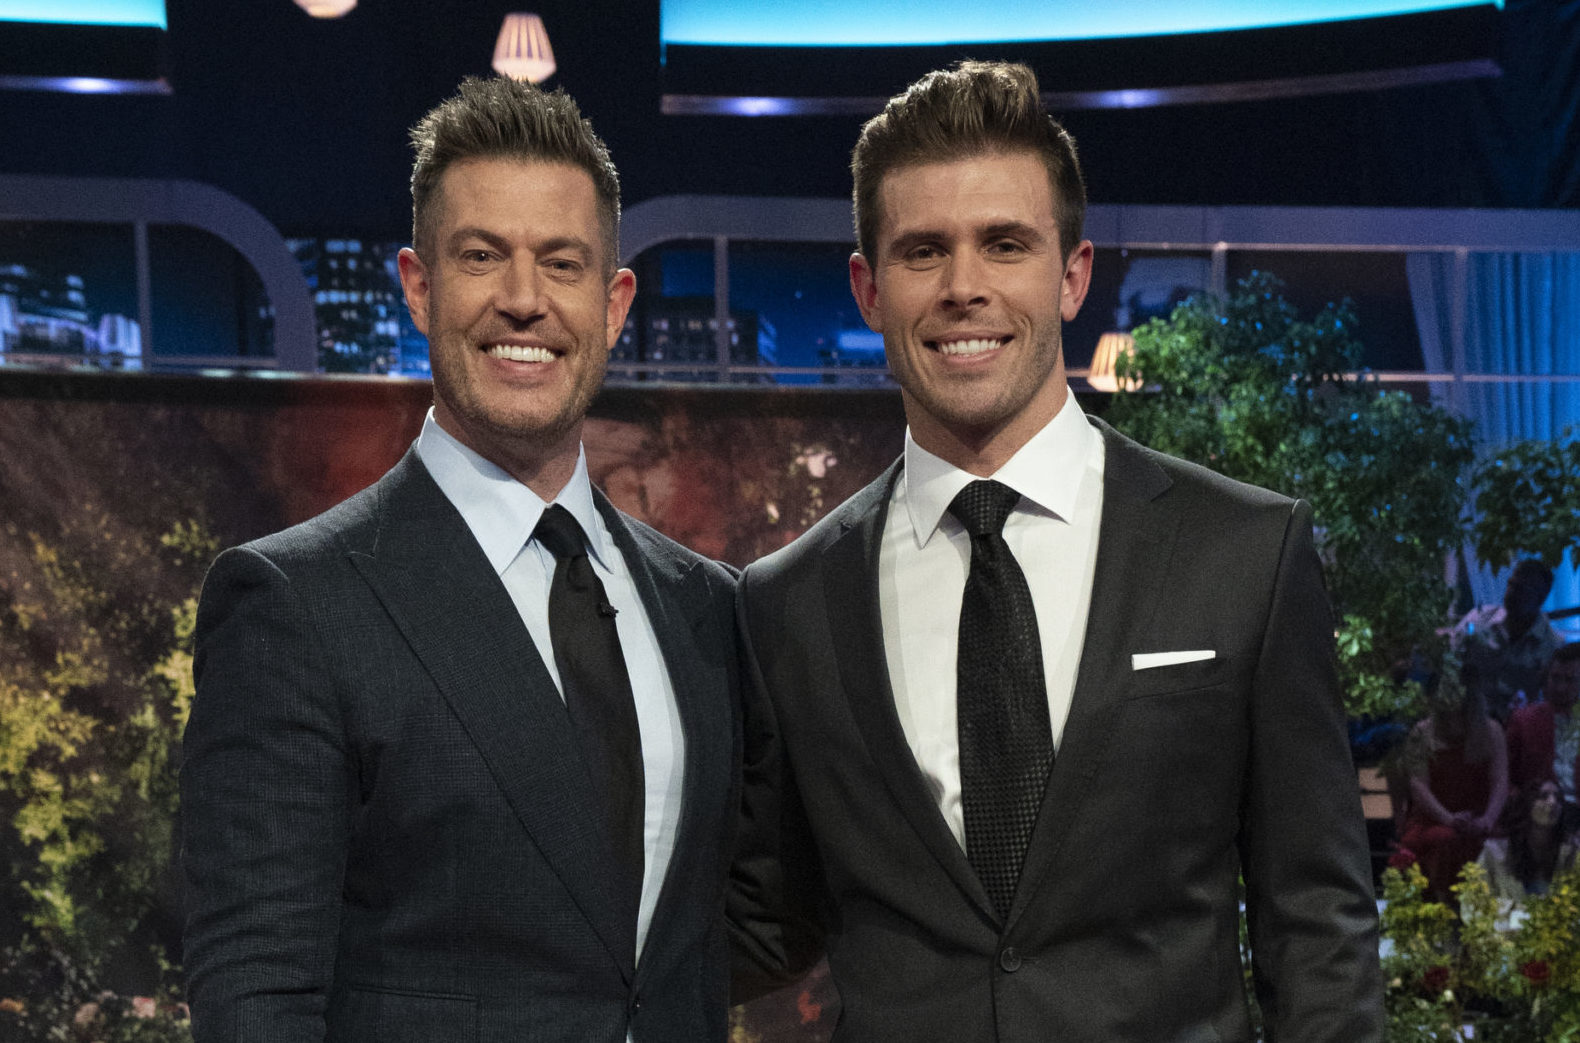 #The Bachelor: Season 27 Premiere Date Announced; Zach Shallcross to Lead ABC Dating Series